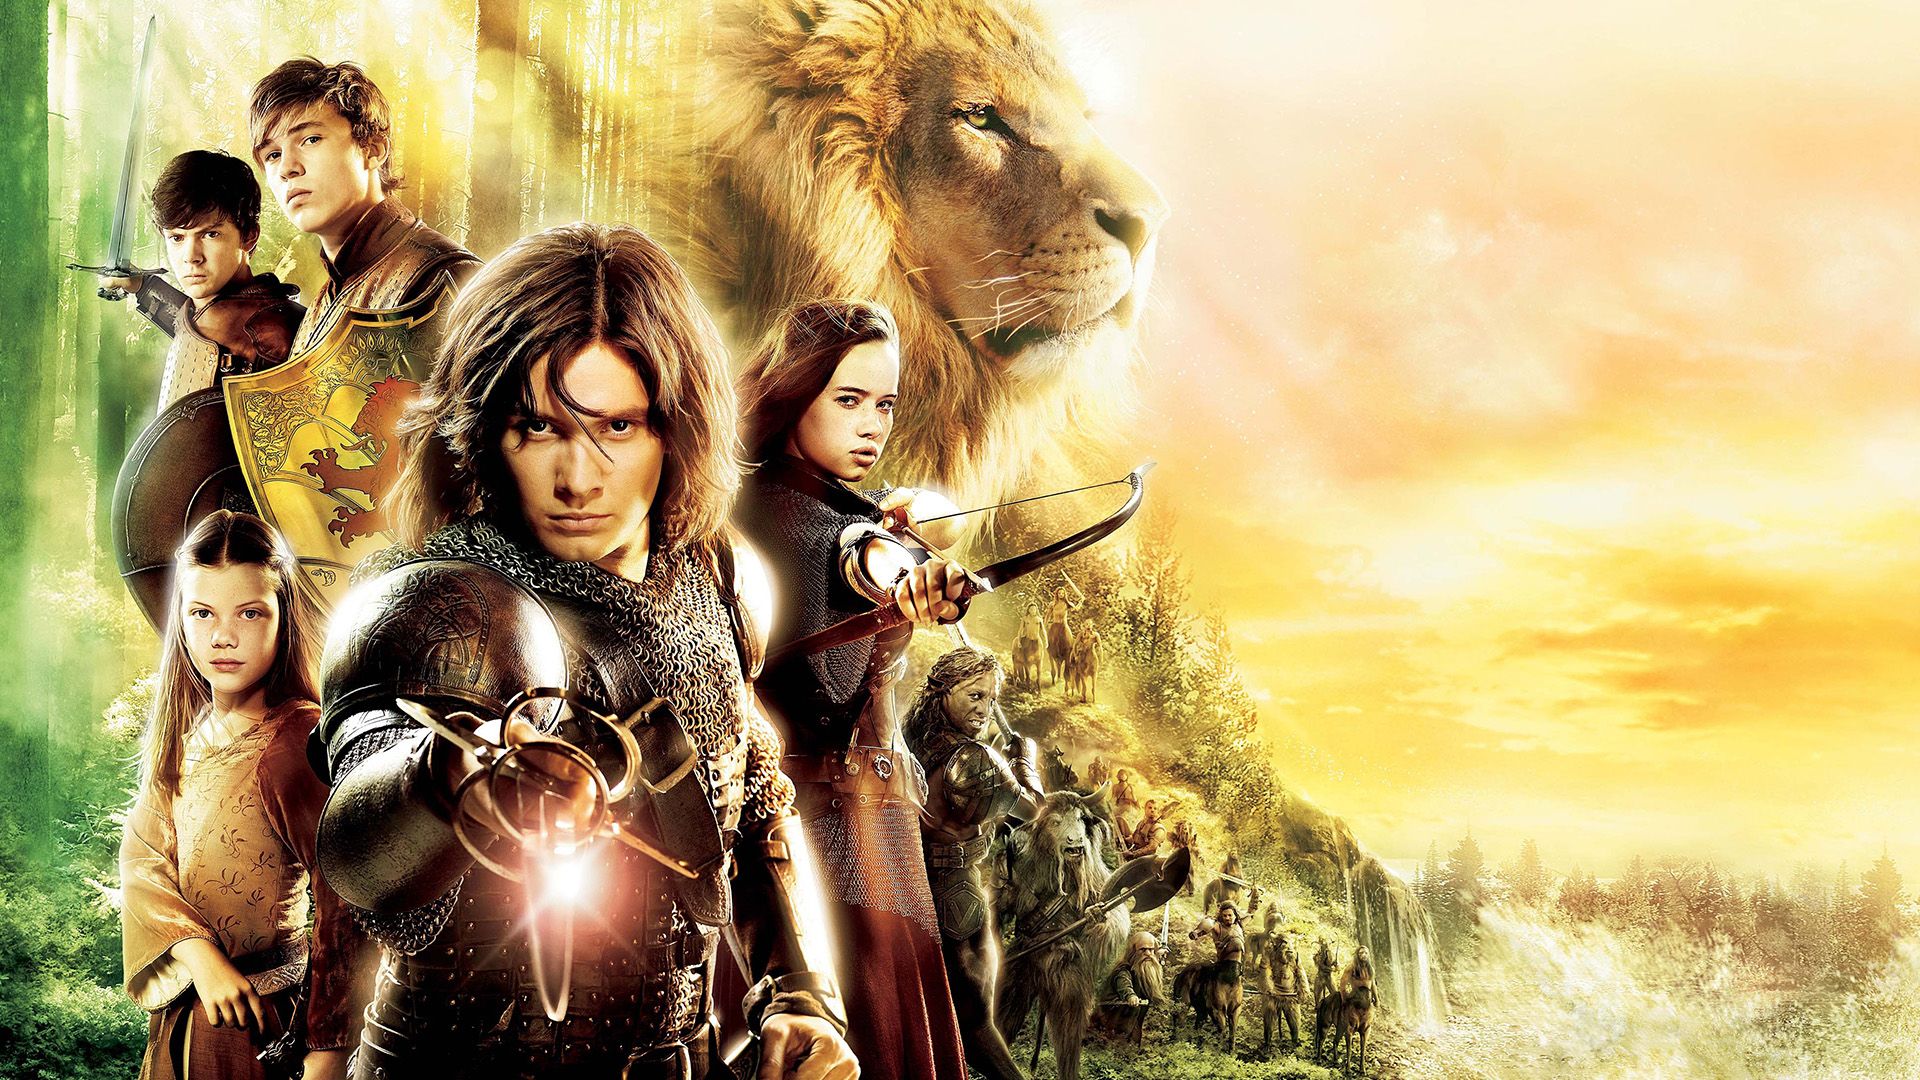 The Chronicles of Narnia: Prince Caspian background